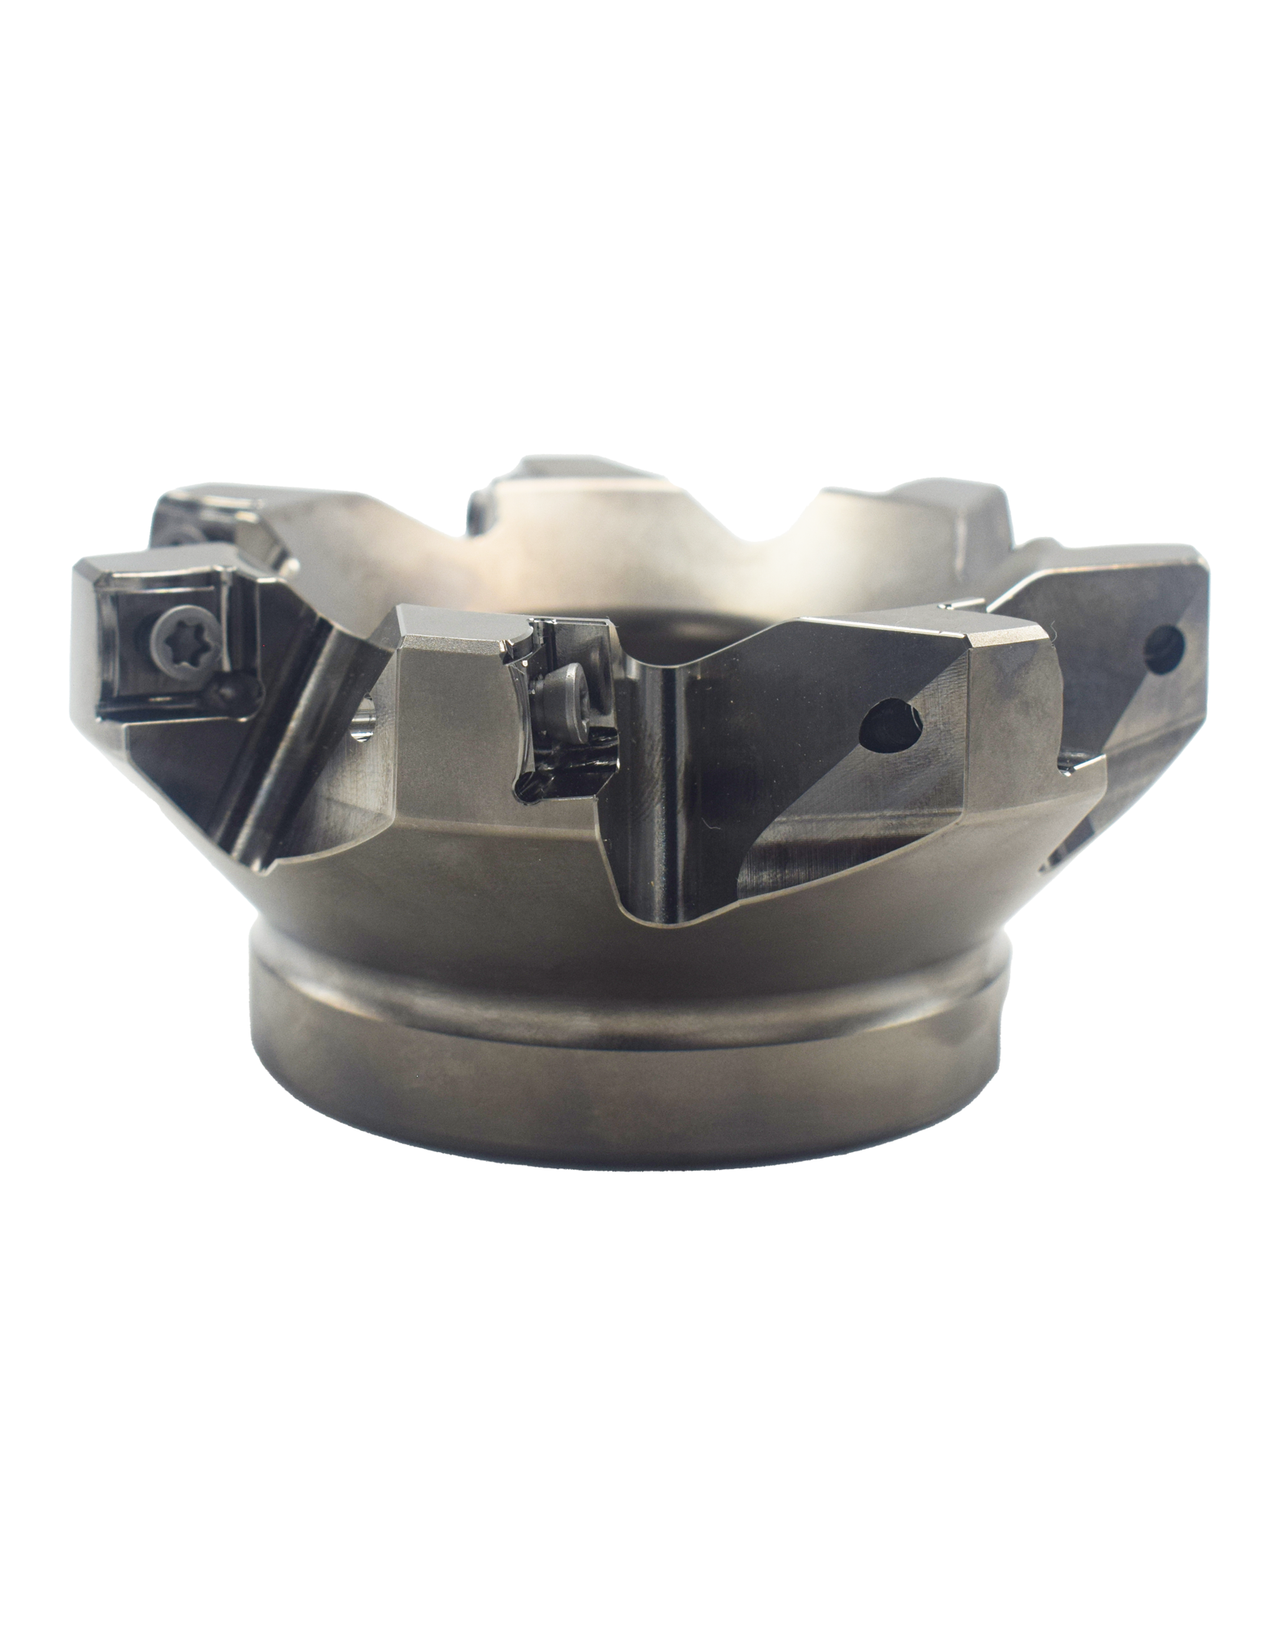 100 mm SNMX1206 Insert Facemill in 45 Degree And 88 Degree Suitable To KORLOY Brand